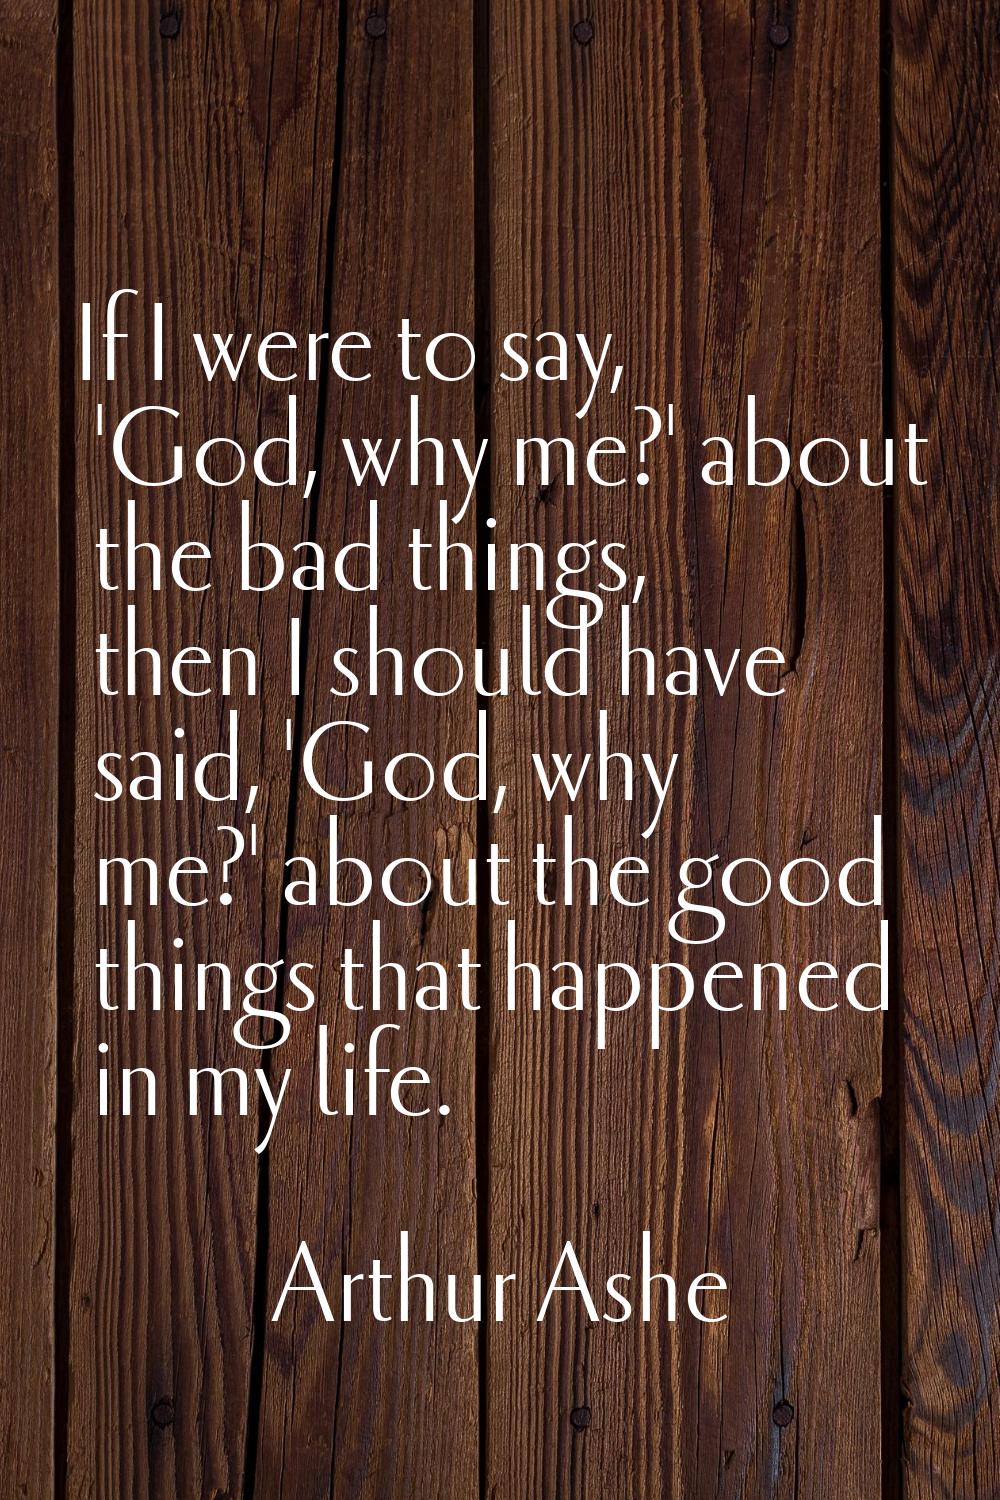 If I were to say, 'God, why me?' about the bad things, then I should have said, 'God, why me?' abou